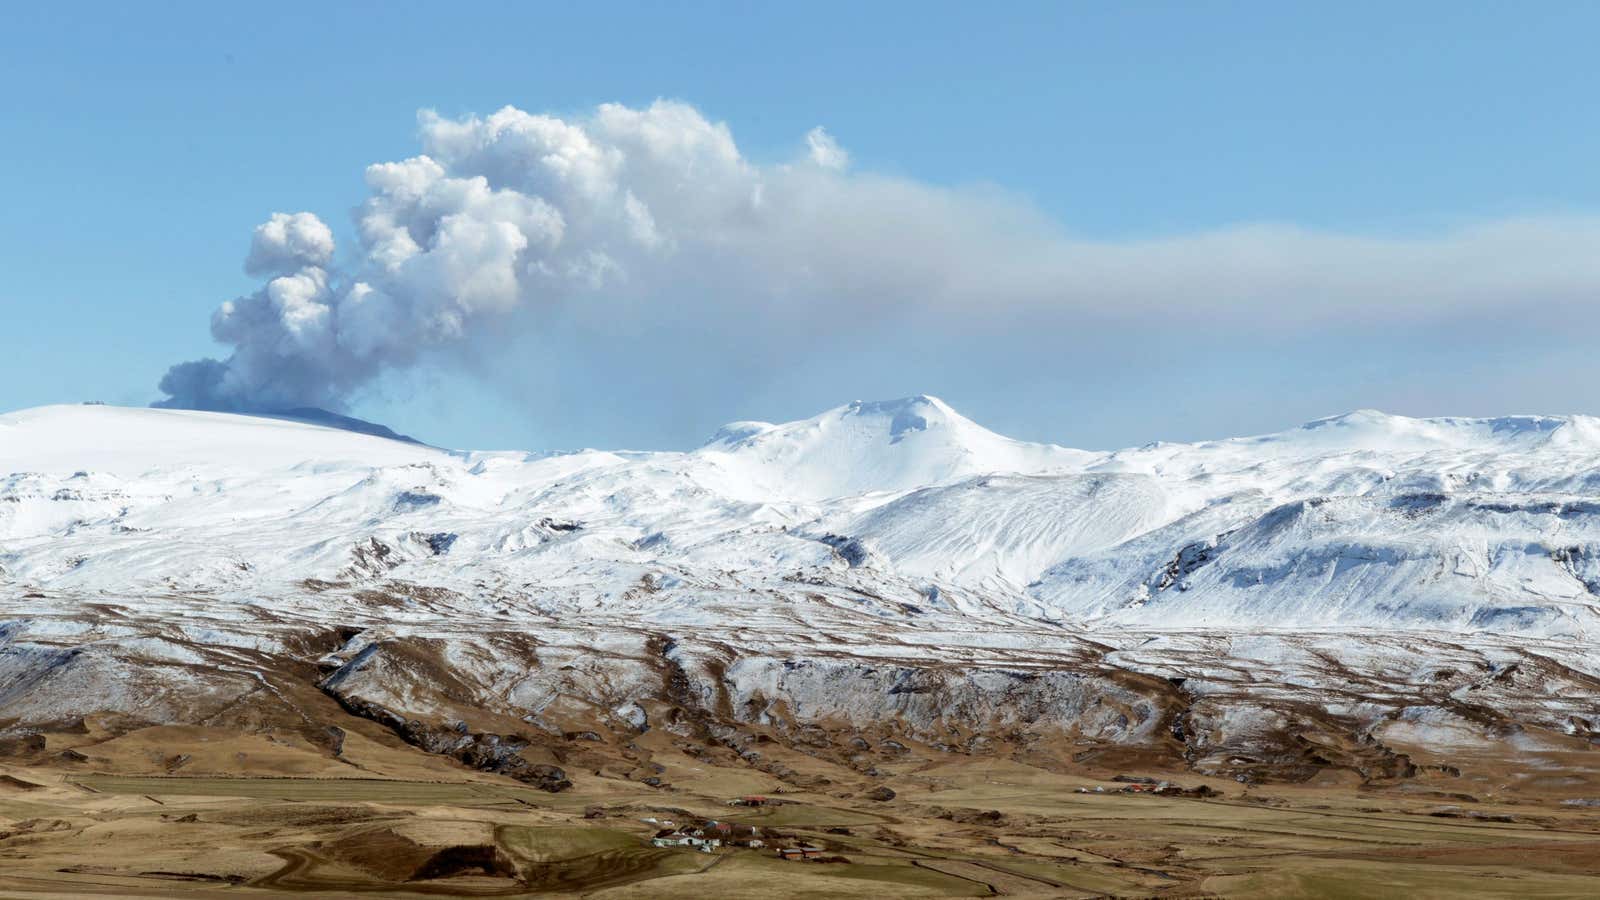 The Eyjafjallajokull volcano caused widespread air travel disruption when it erupted in April 2010.